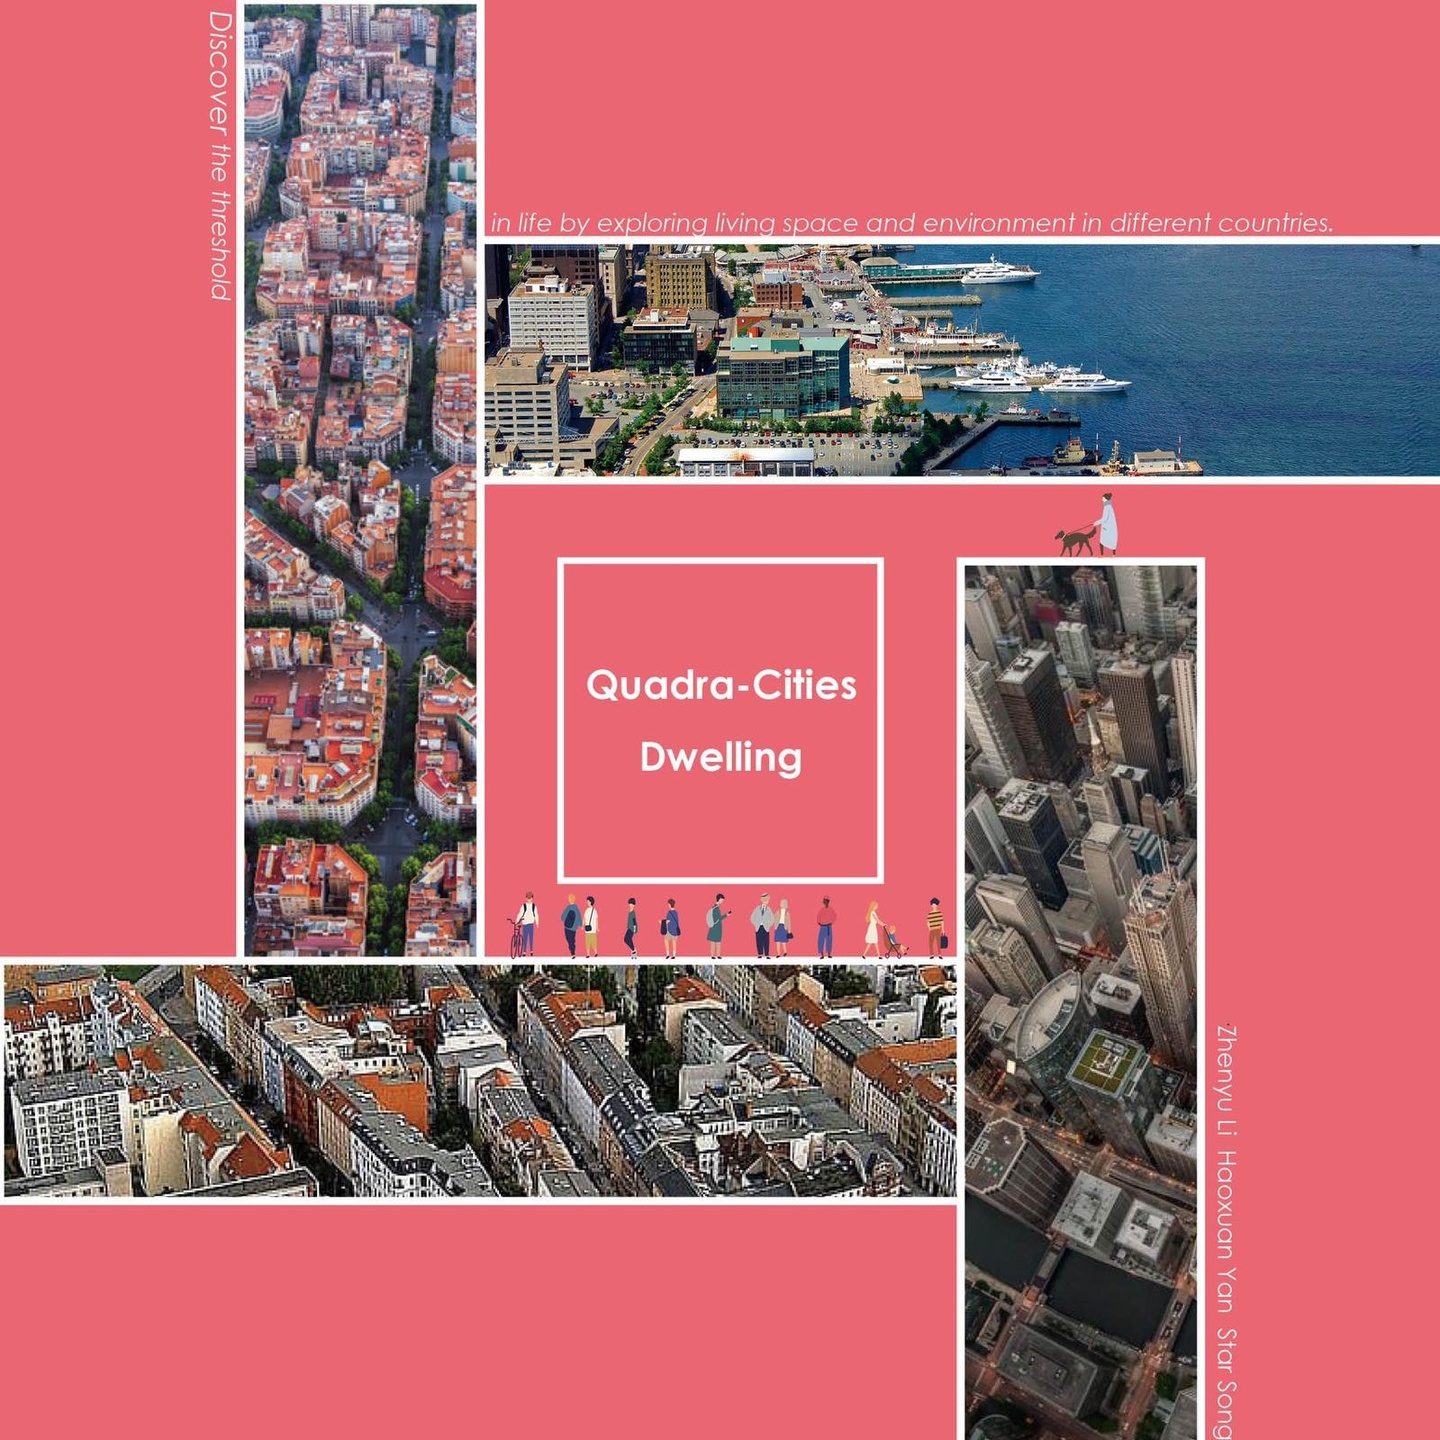 Pink background with a series of four narrow rectangles featuring photos arranged to form a pattern with a square in the center, containing the project title, Quadra-Cities Dwelling.